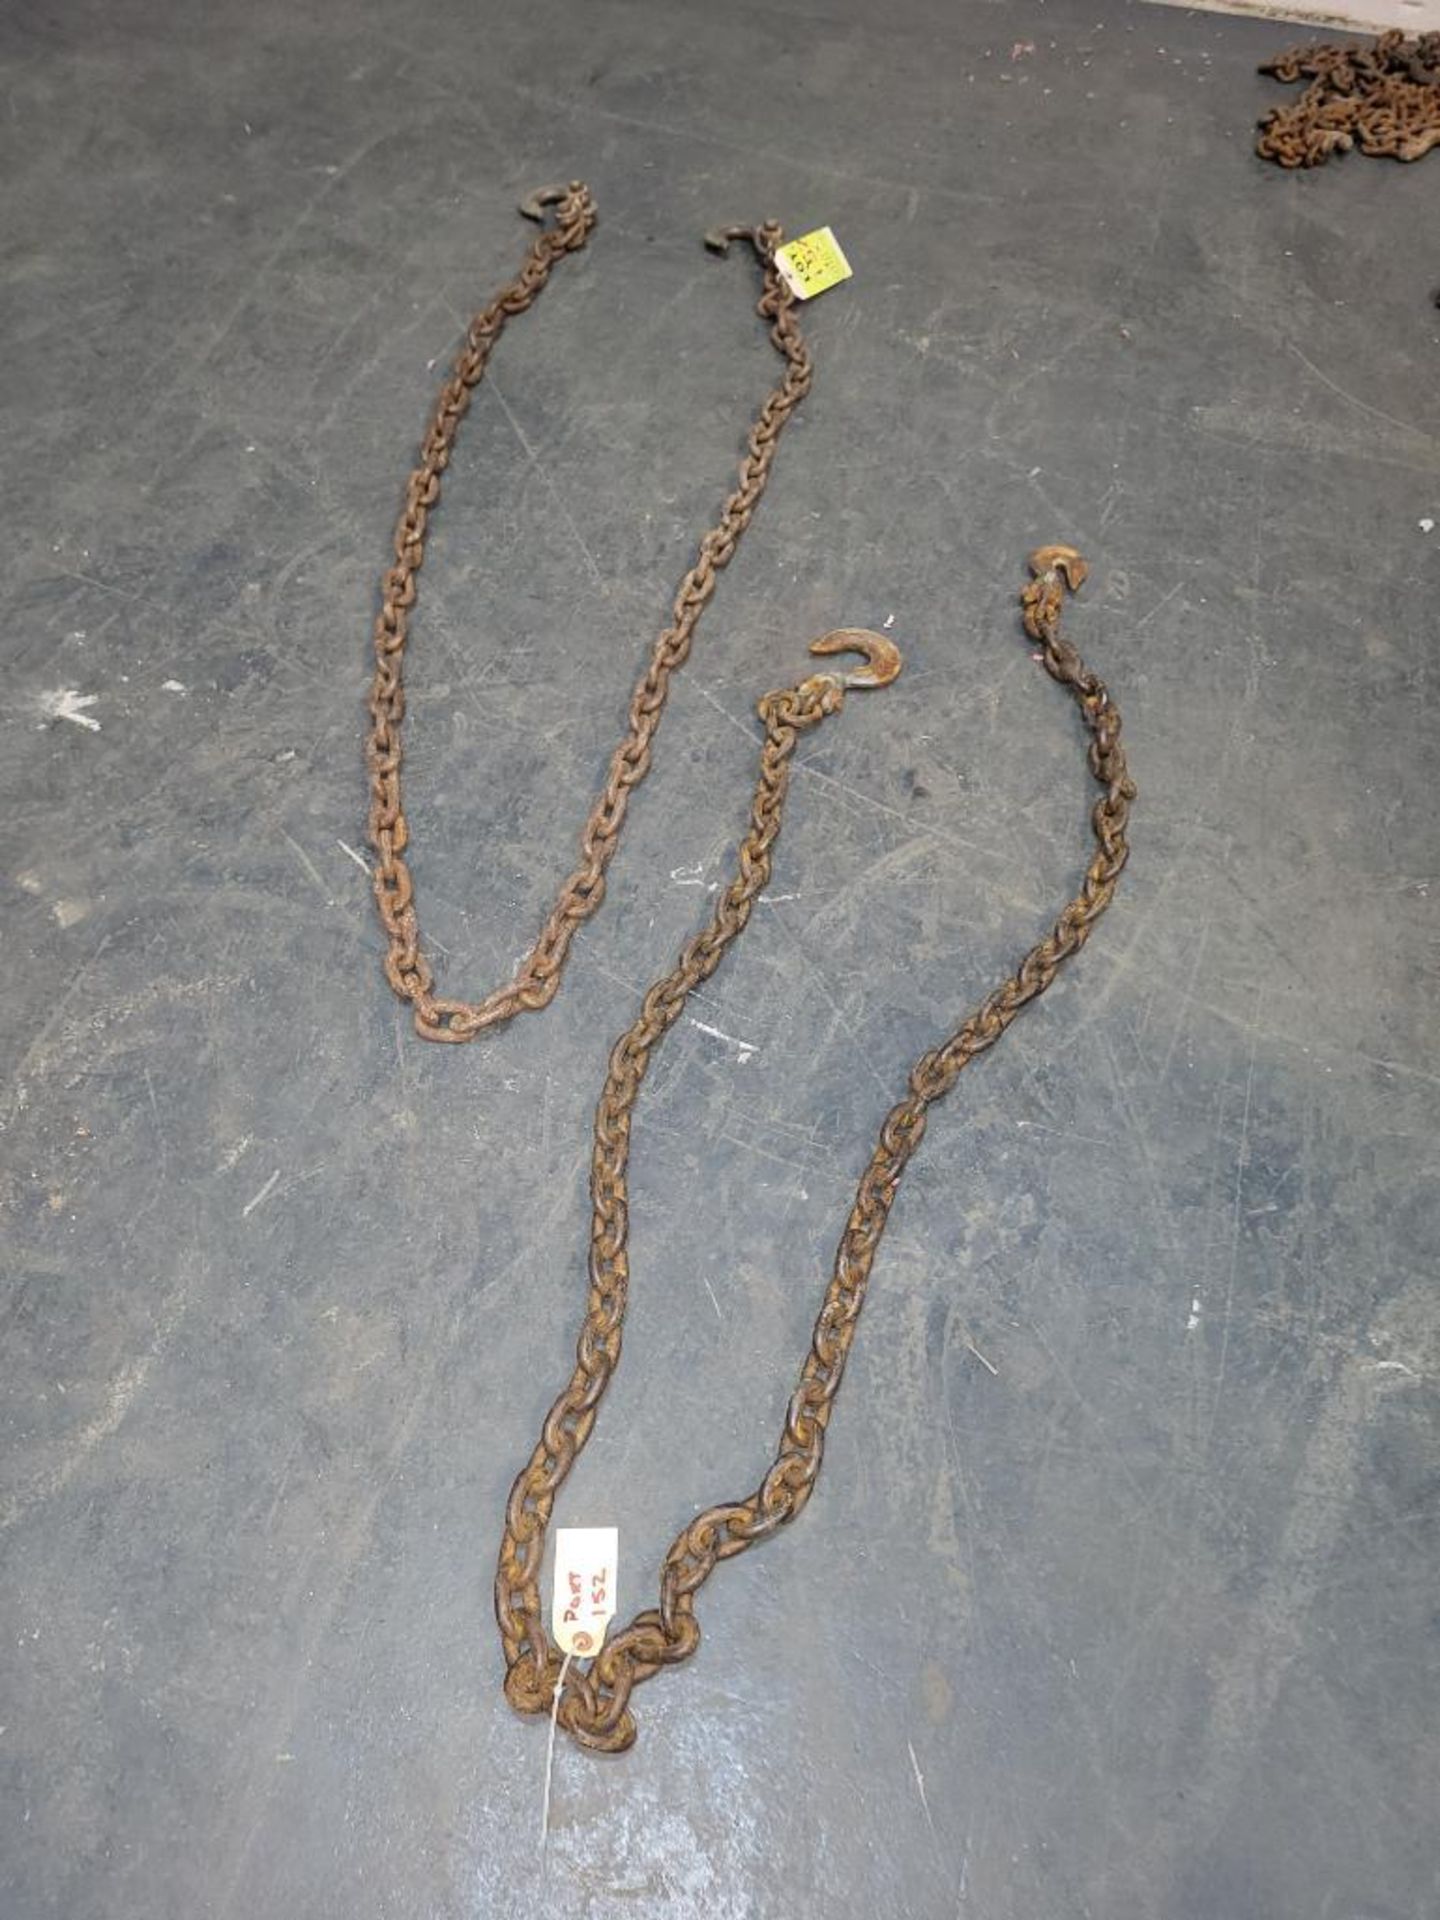 Lot Of 2 Chains W/Hooks 1x 6 Inch 1 x 7 Inch